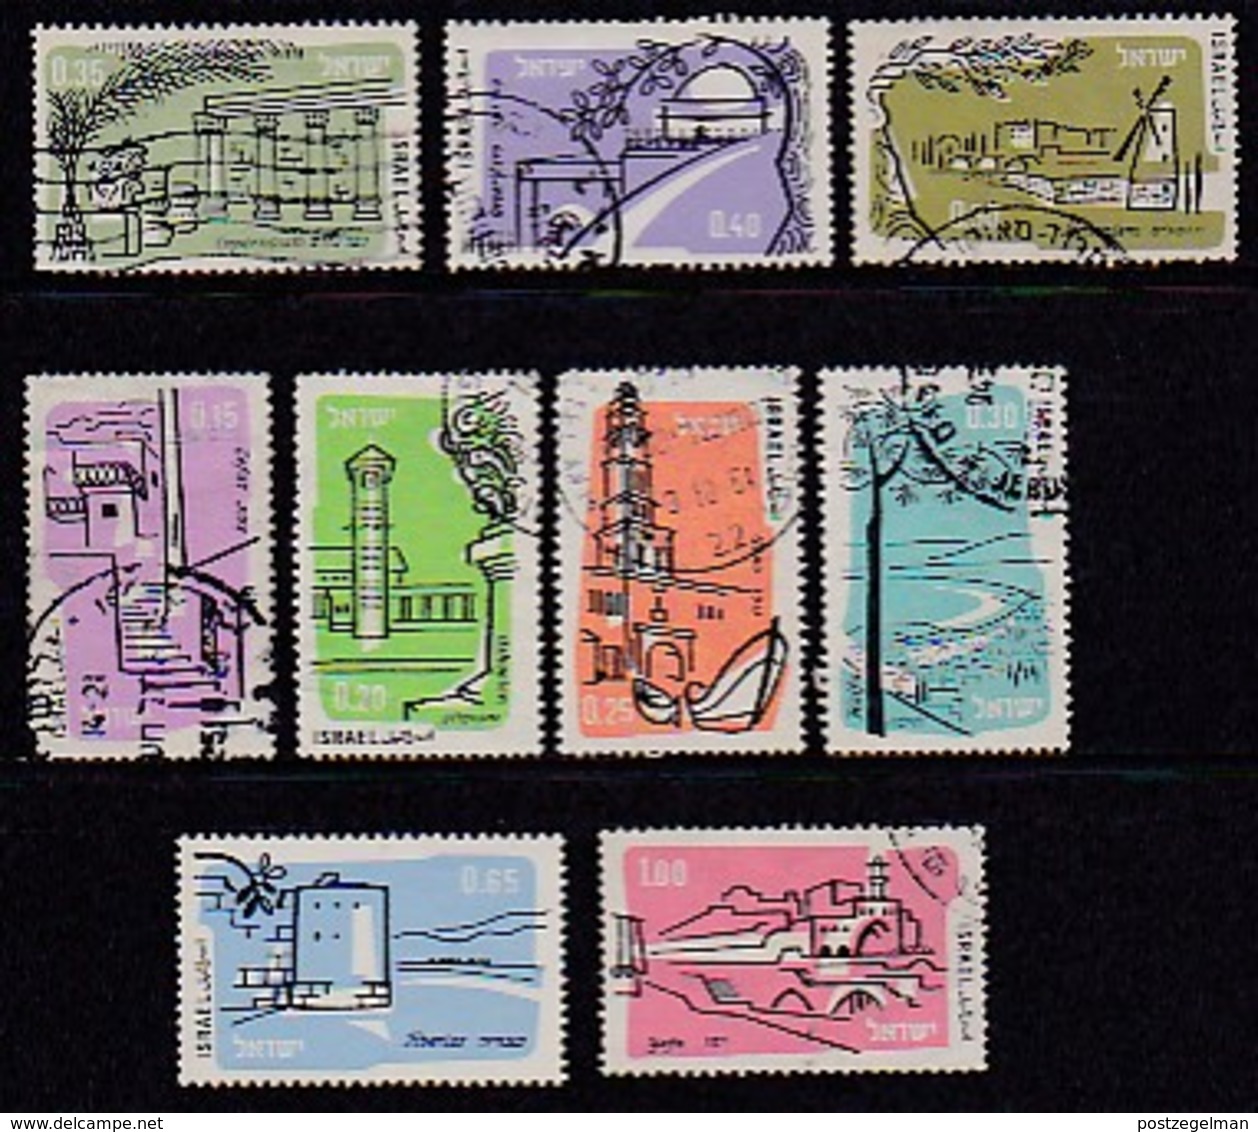 ISRAEL, 1960, Used Stamp(s), Without Tab, Airmail,  SGnr.183=185a, Scannr. 17518,  9 Values Only - Used Stamps (without Tabs)